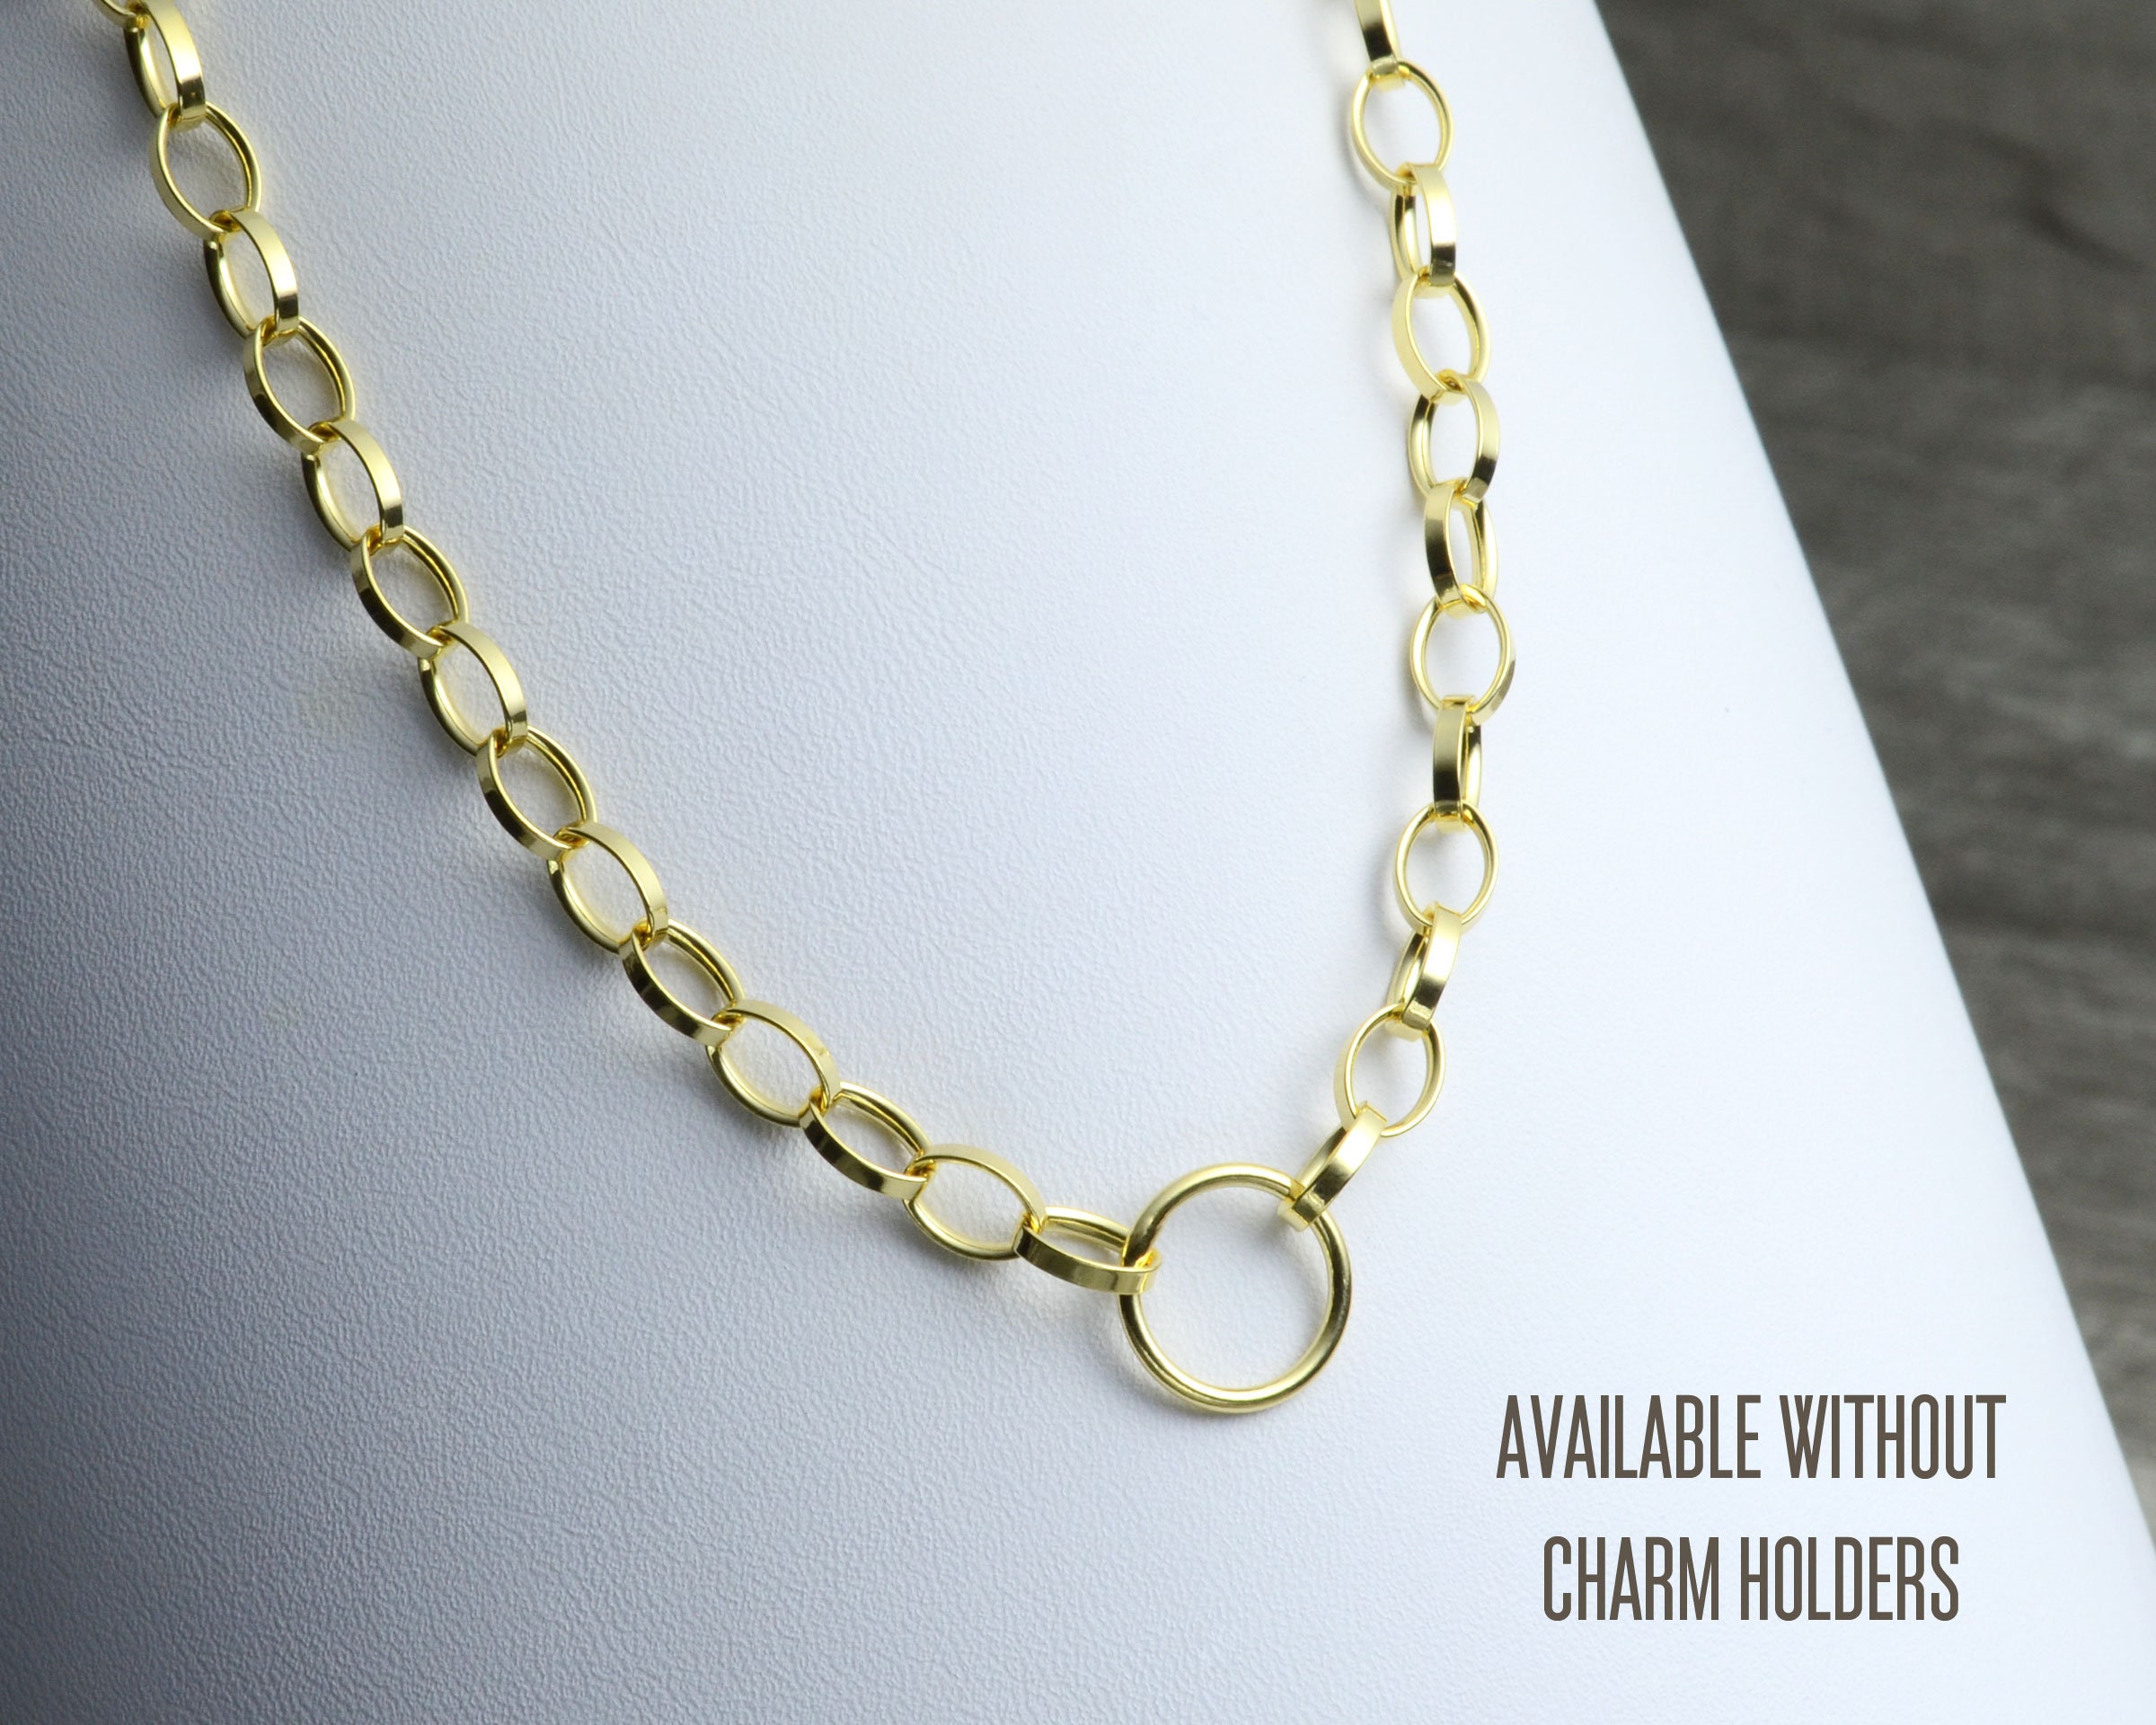 Gold Charm Necklace for Her With 2 Charm Holder Stations